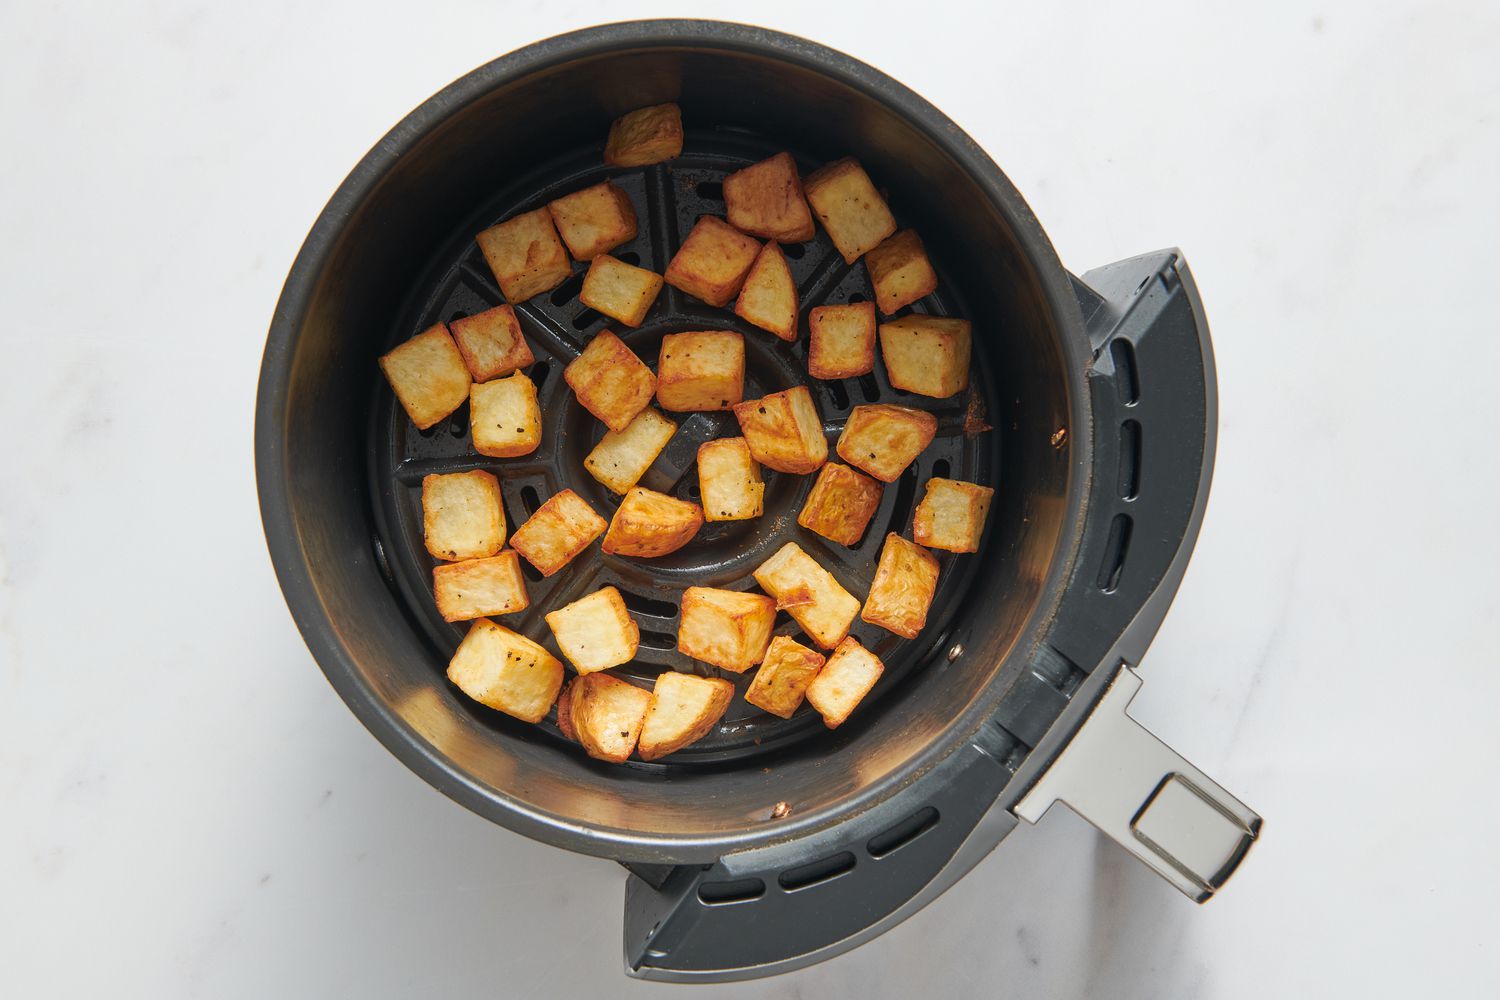 An air fryer basked with browned potato chunks